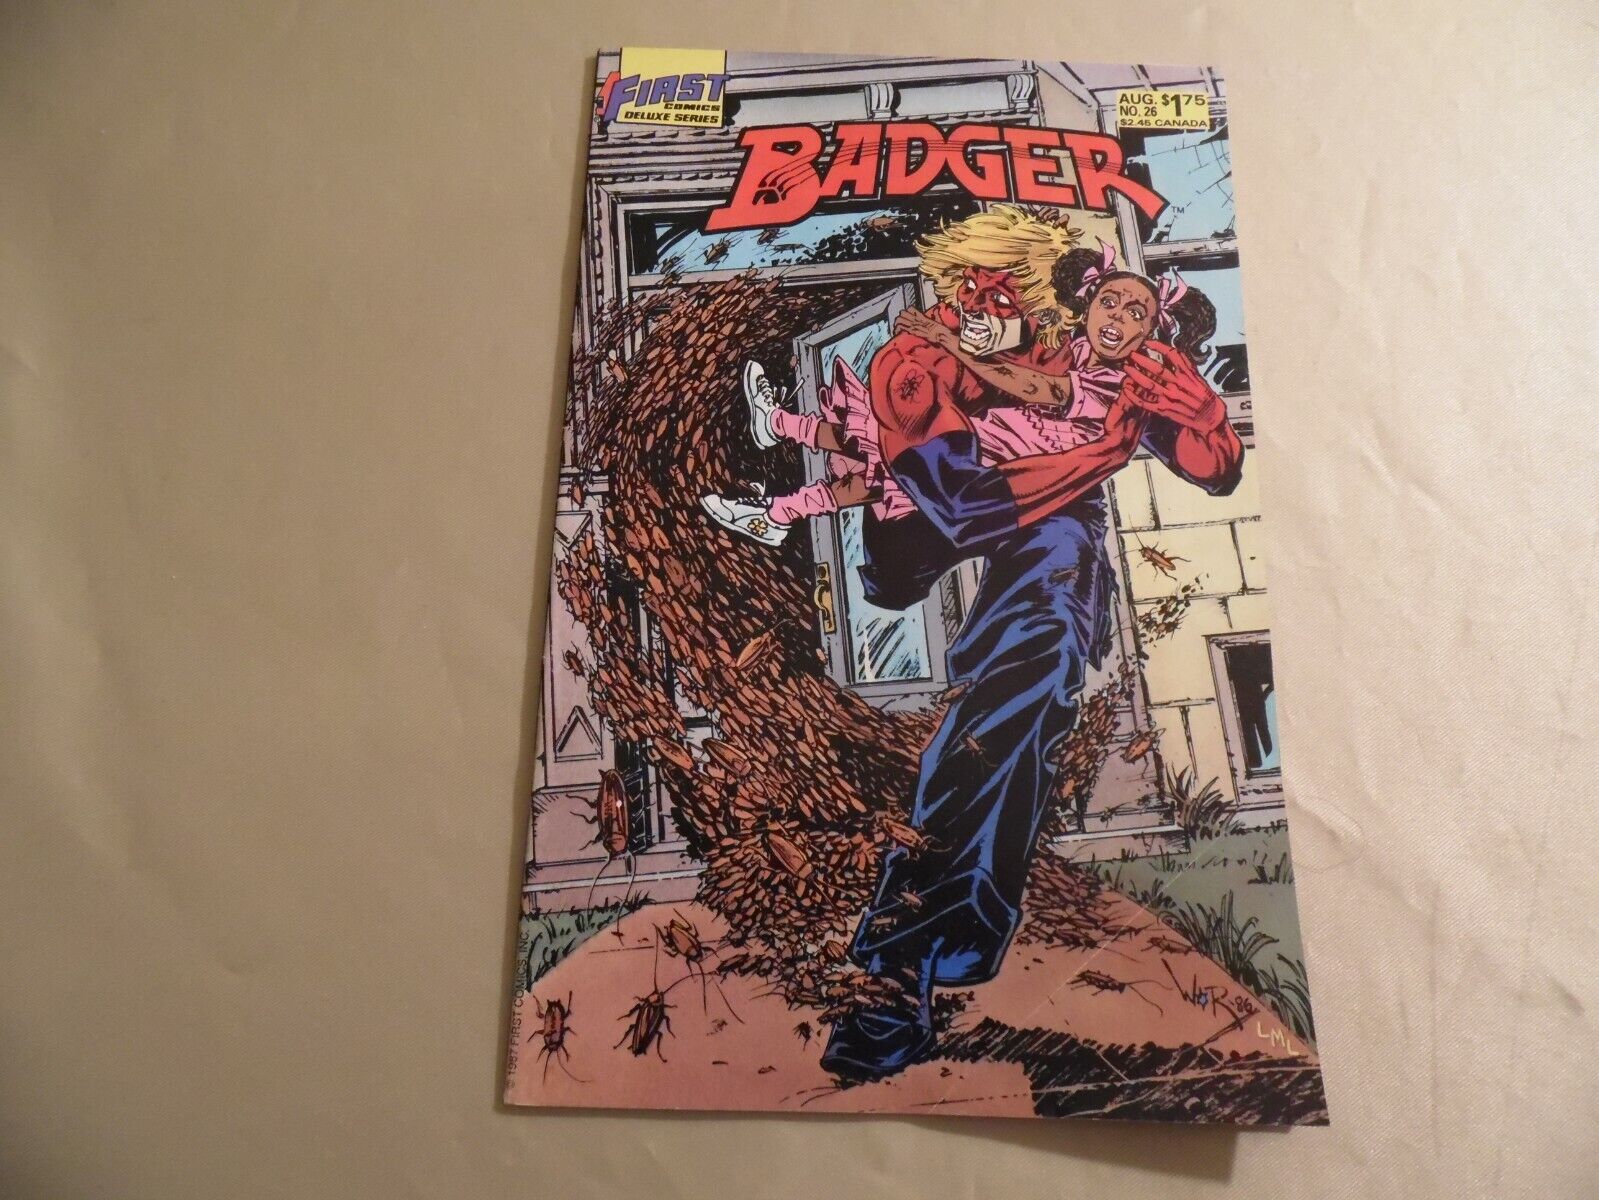 Badger #26 (First 1987) Free Domestic Shipping